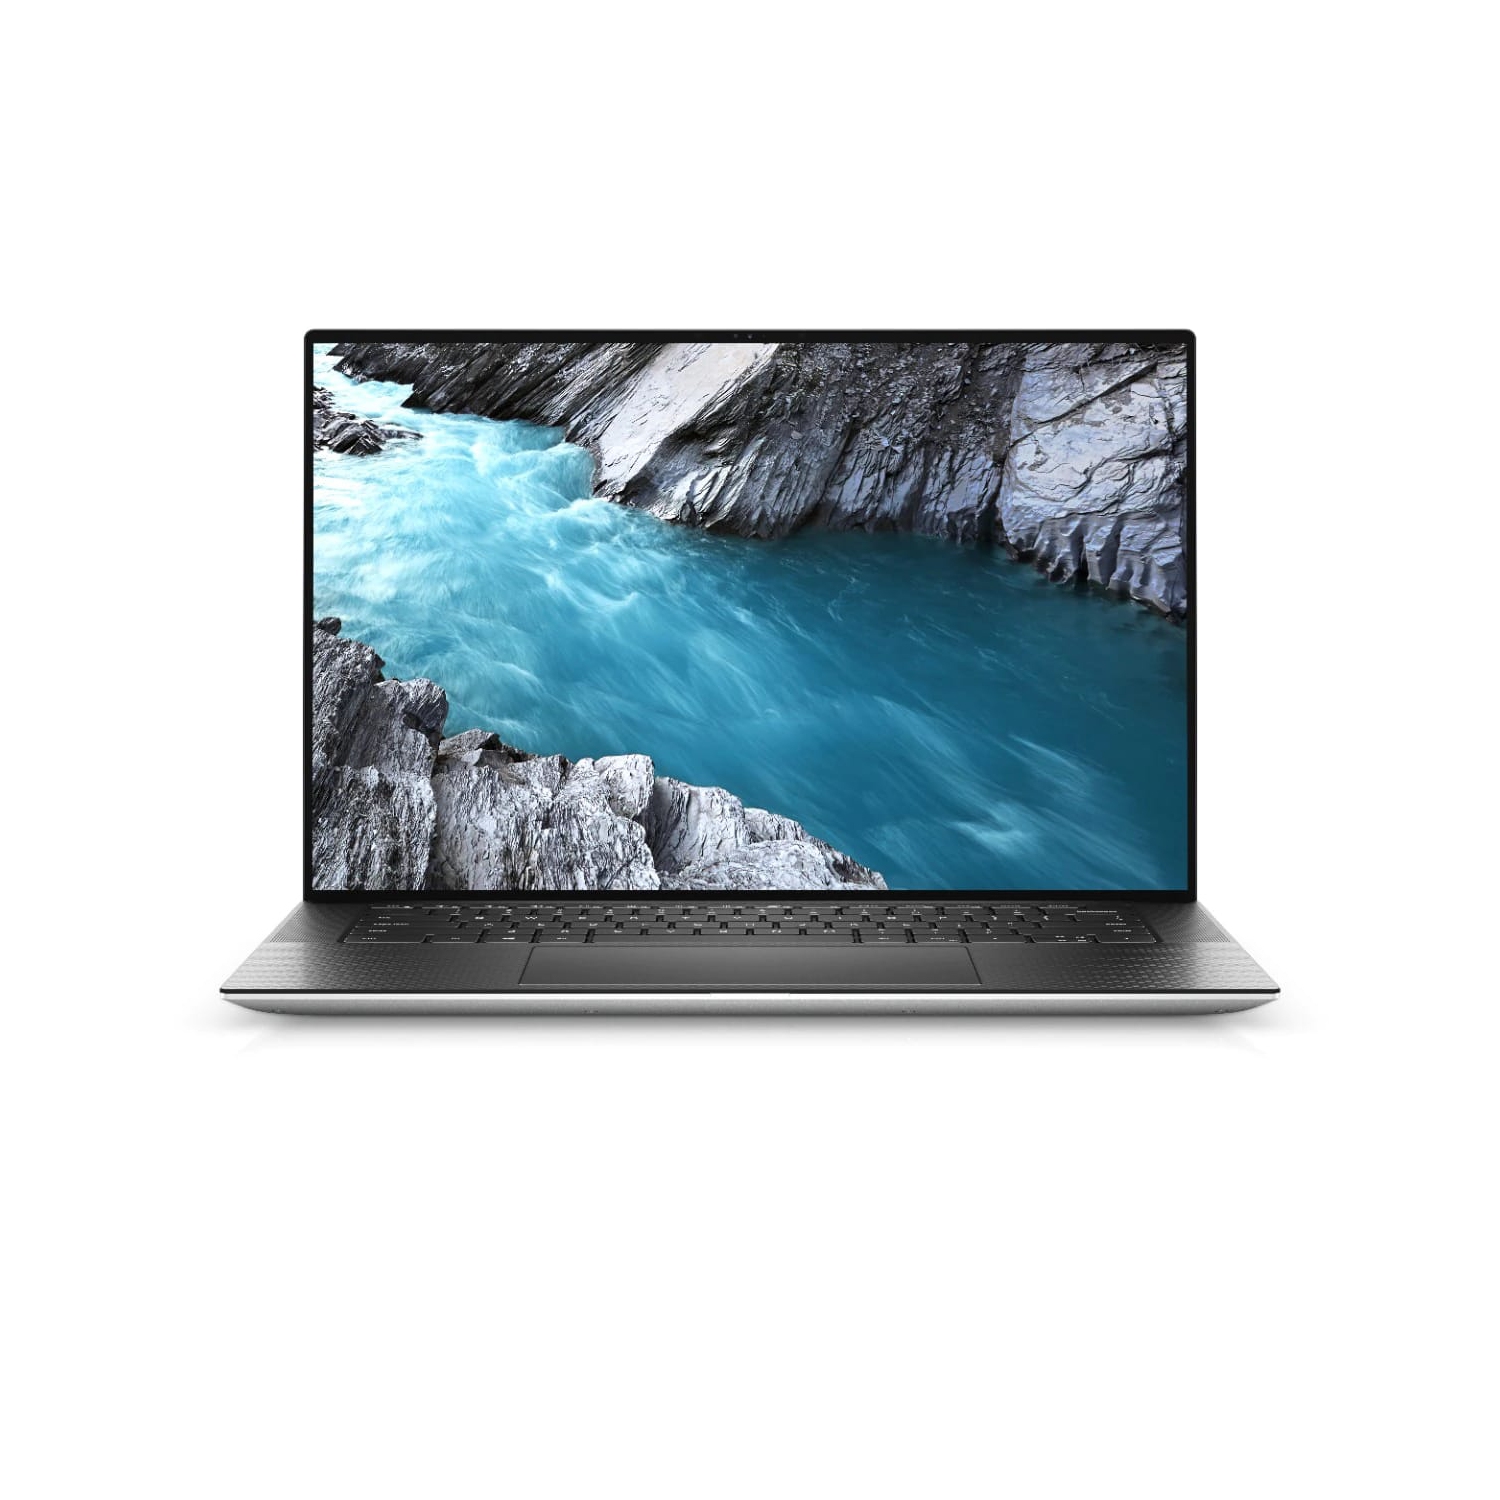 Refurbished (Excellent) – Dell XPS 9500 Laptop (2020) | 15" 4K Touch | Core i9 - 512GB SSD - 16GB RAM - 1650 Ti | 8 Cores @ 5.3 GHz - 10th Gen CPU